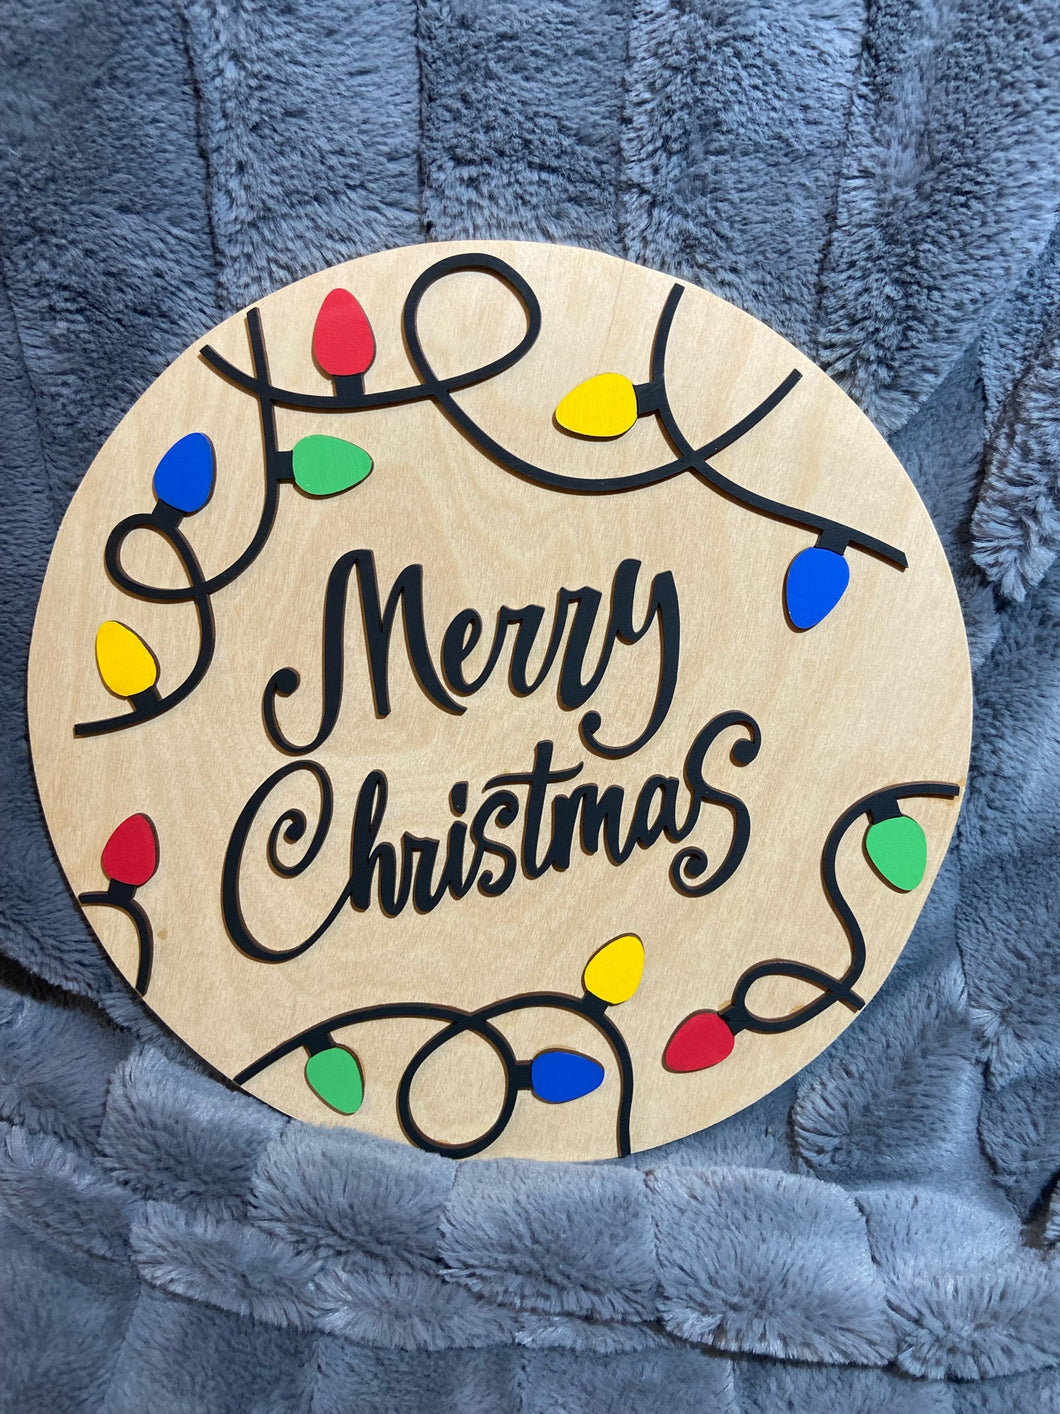 Merry Christmas with colorful light string wood round